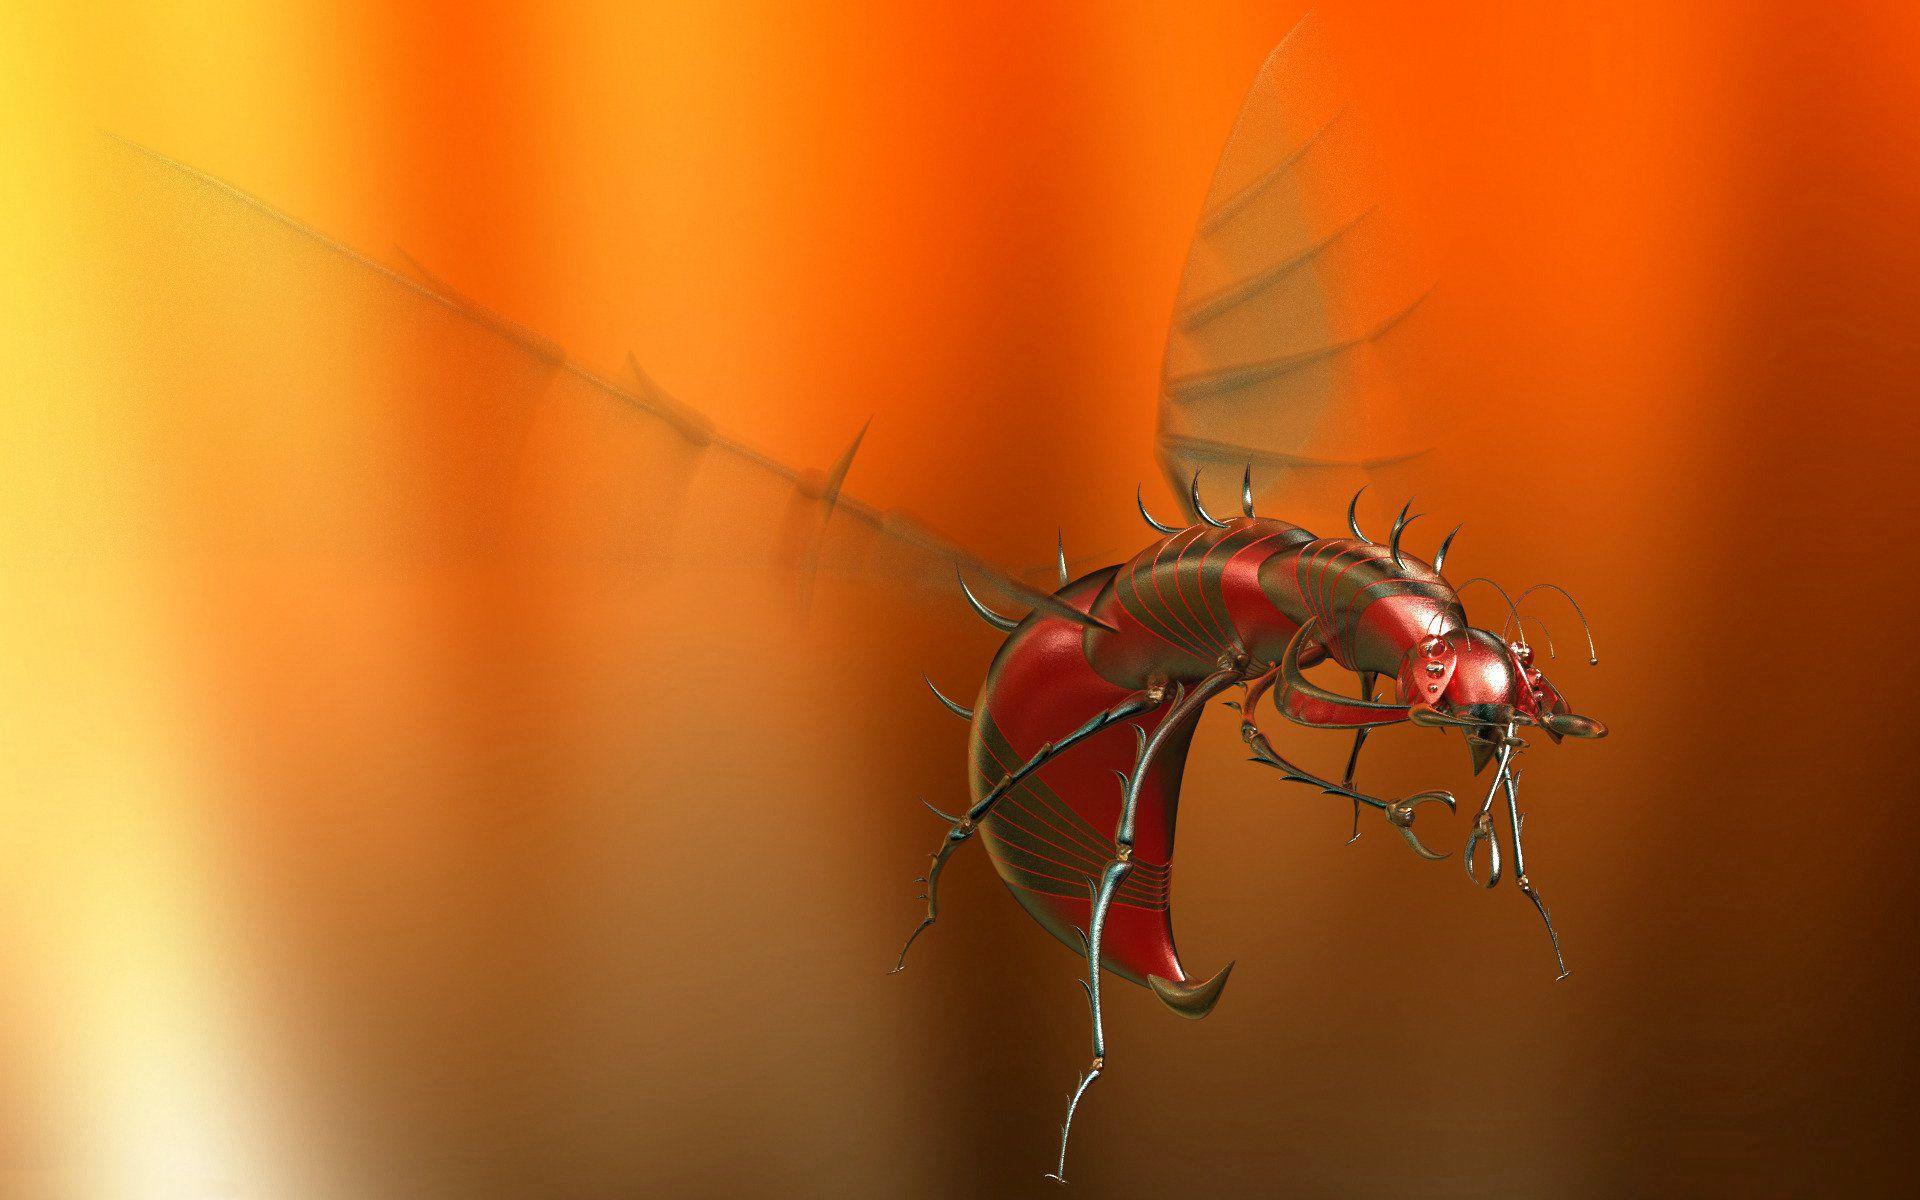 Aluminum mosquito 2K Wallpapers and Backgrounds